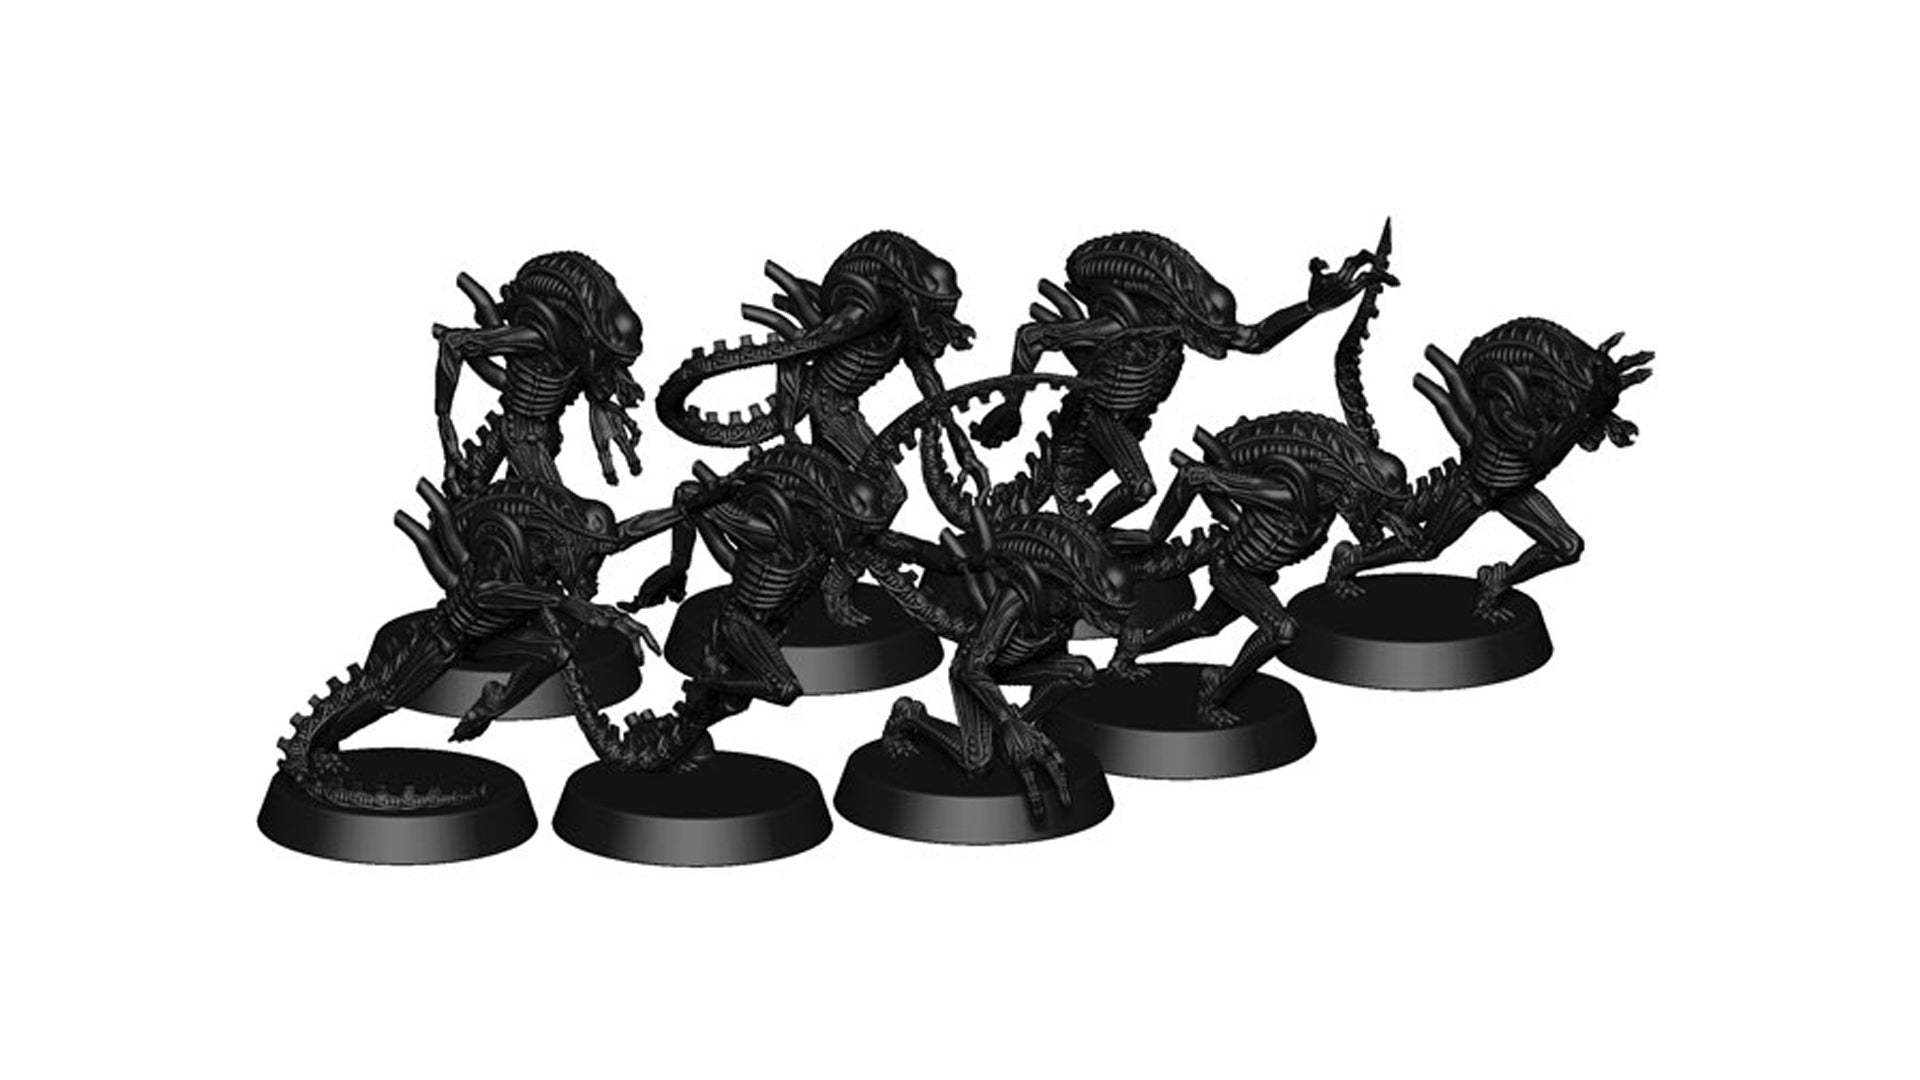 Aliens: Another Glorious Day in the Corps xenomorph miniatures